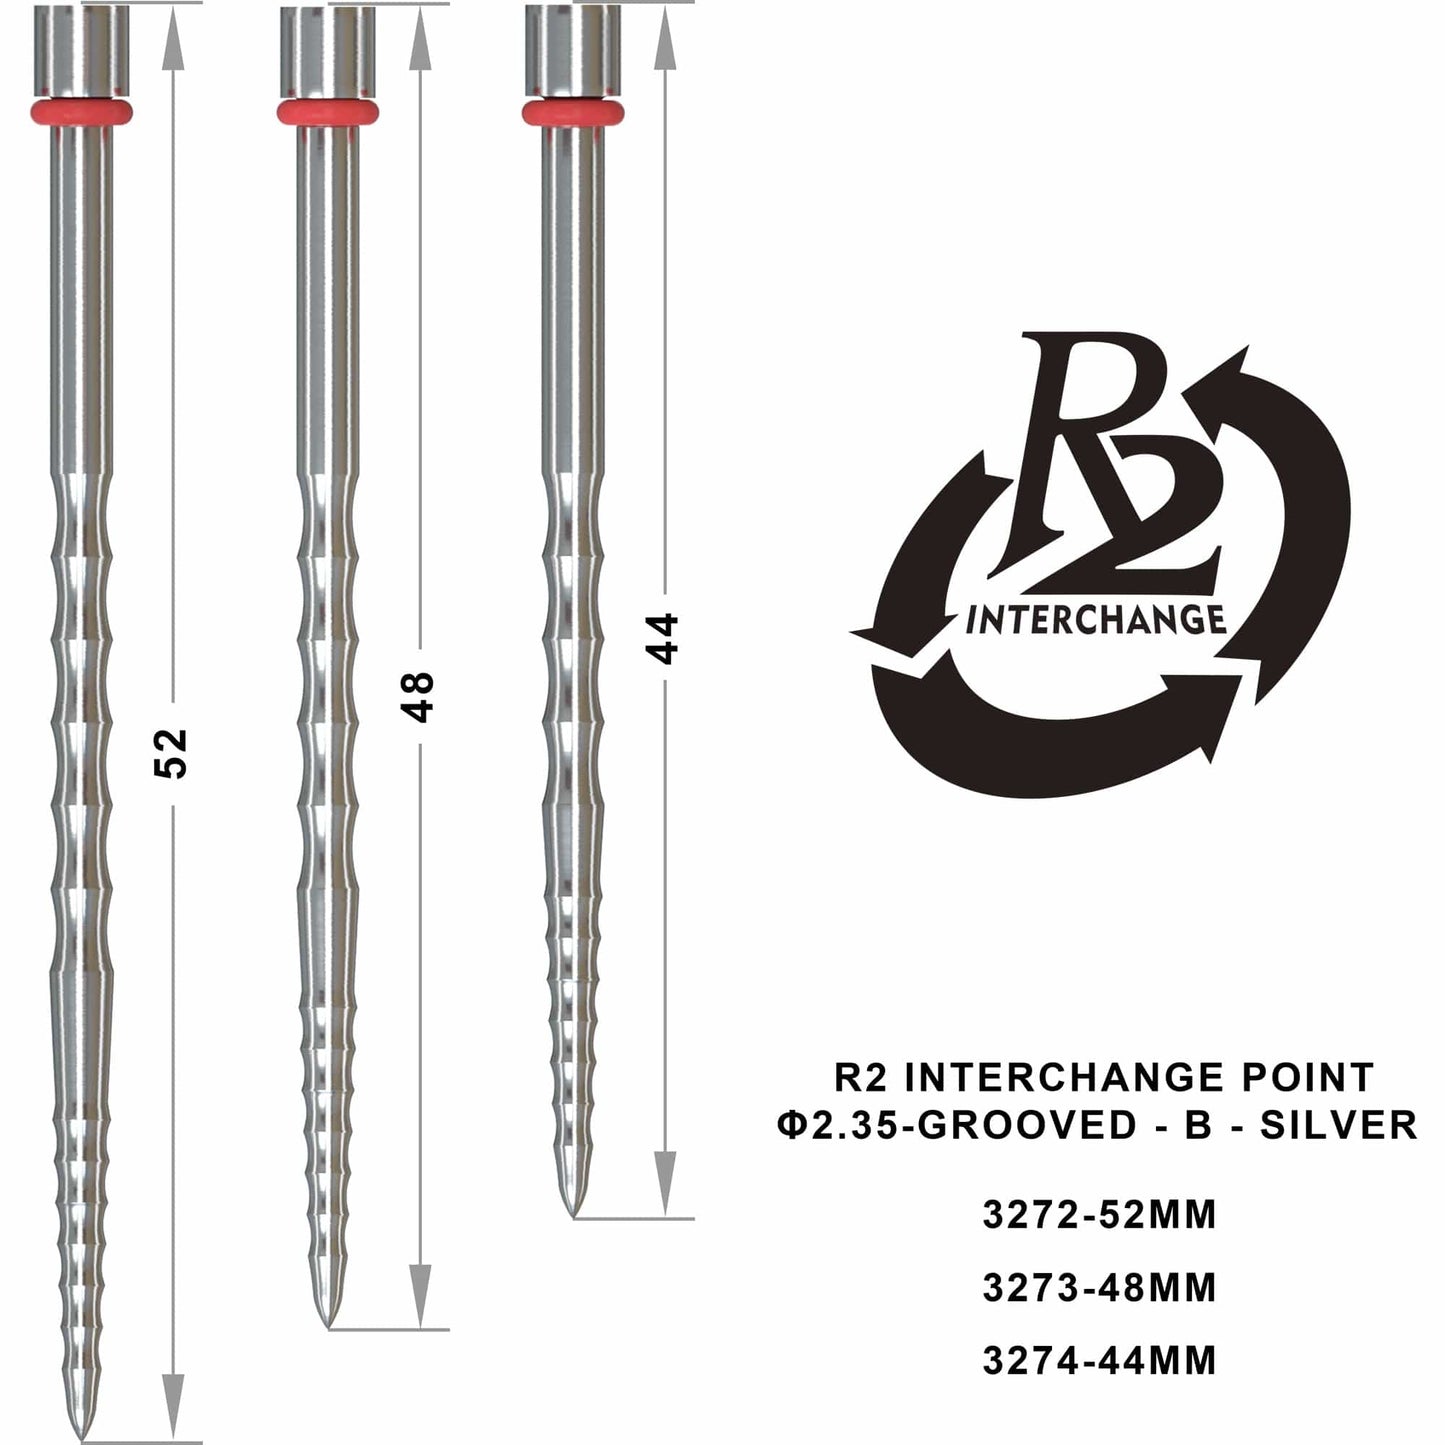 One80 R2 Interchange Points (2.35mm) - Grooved - B - Silver